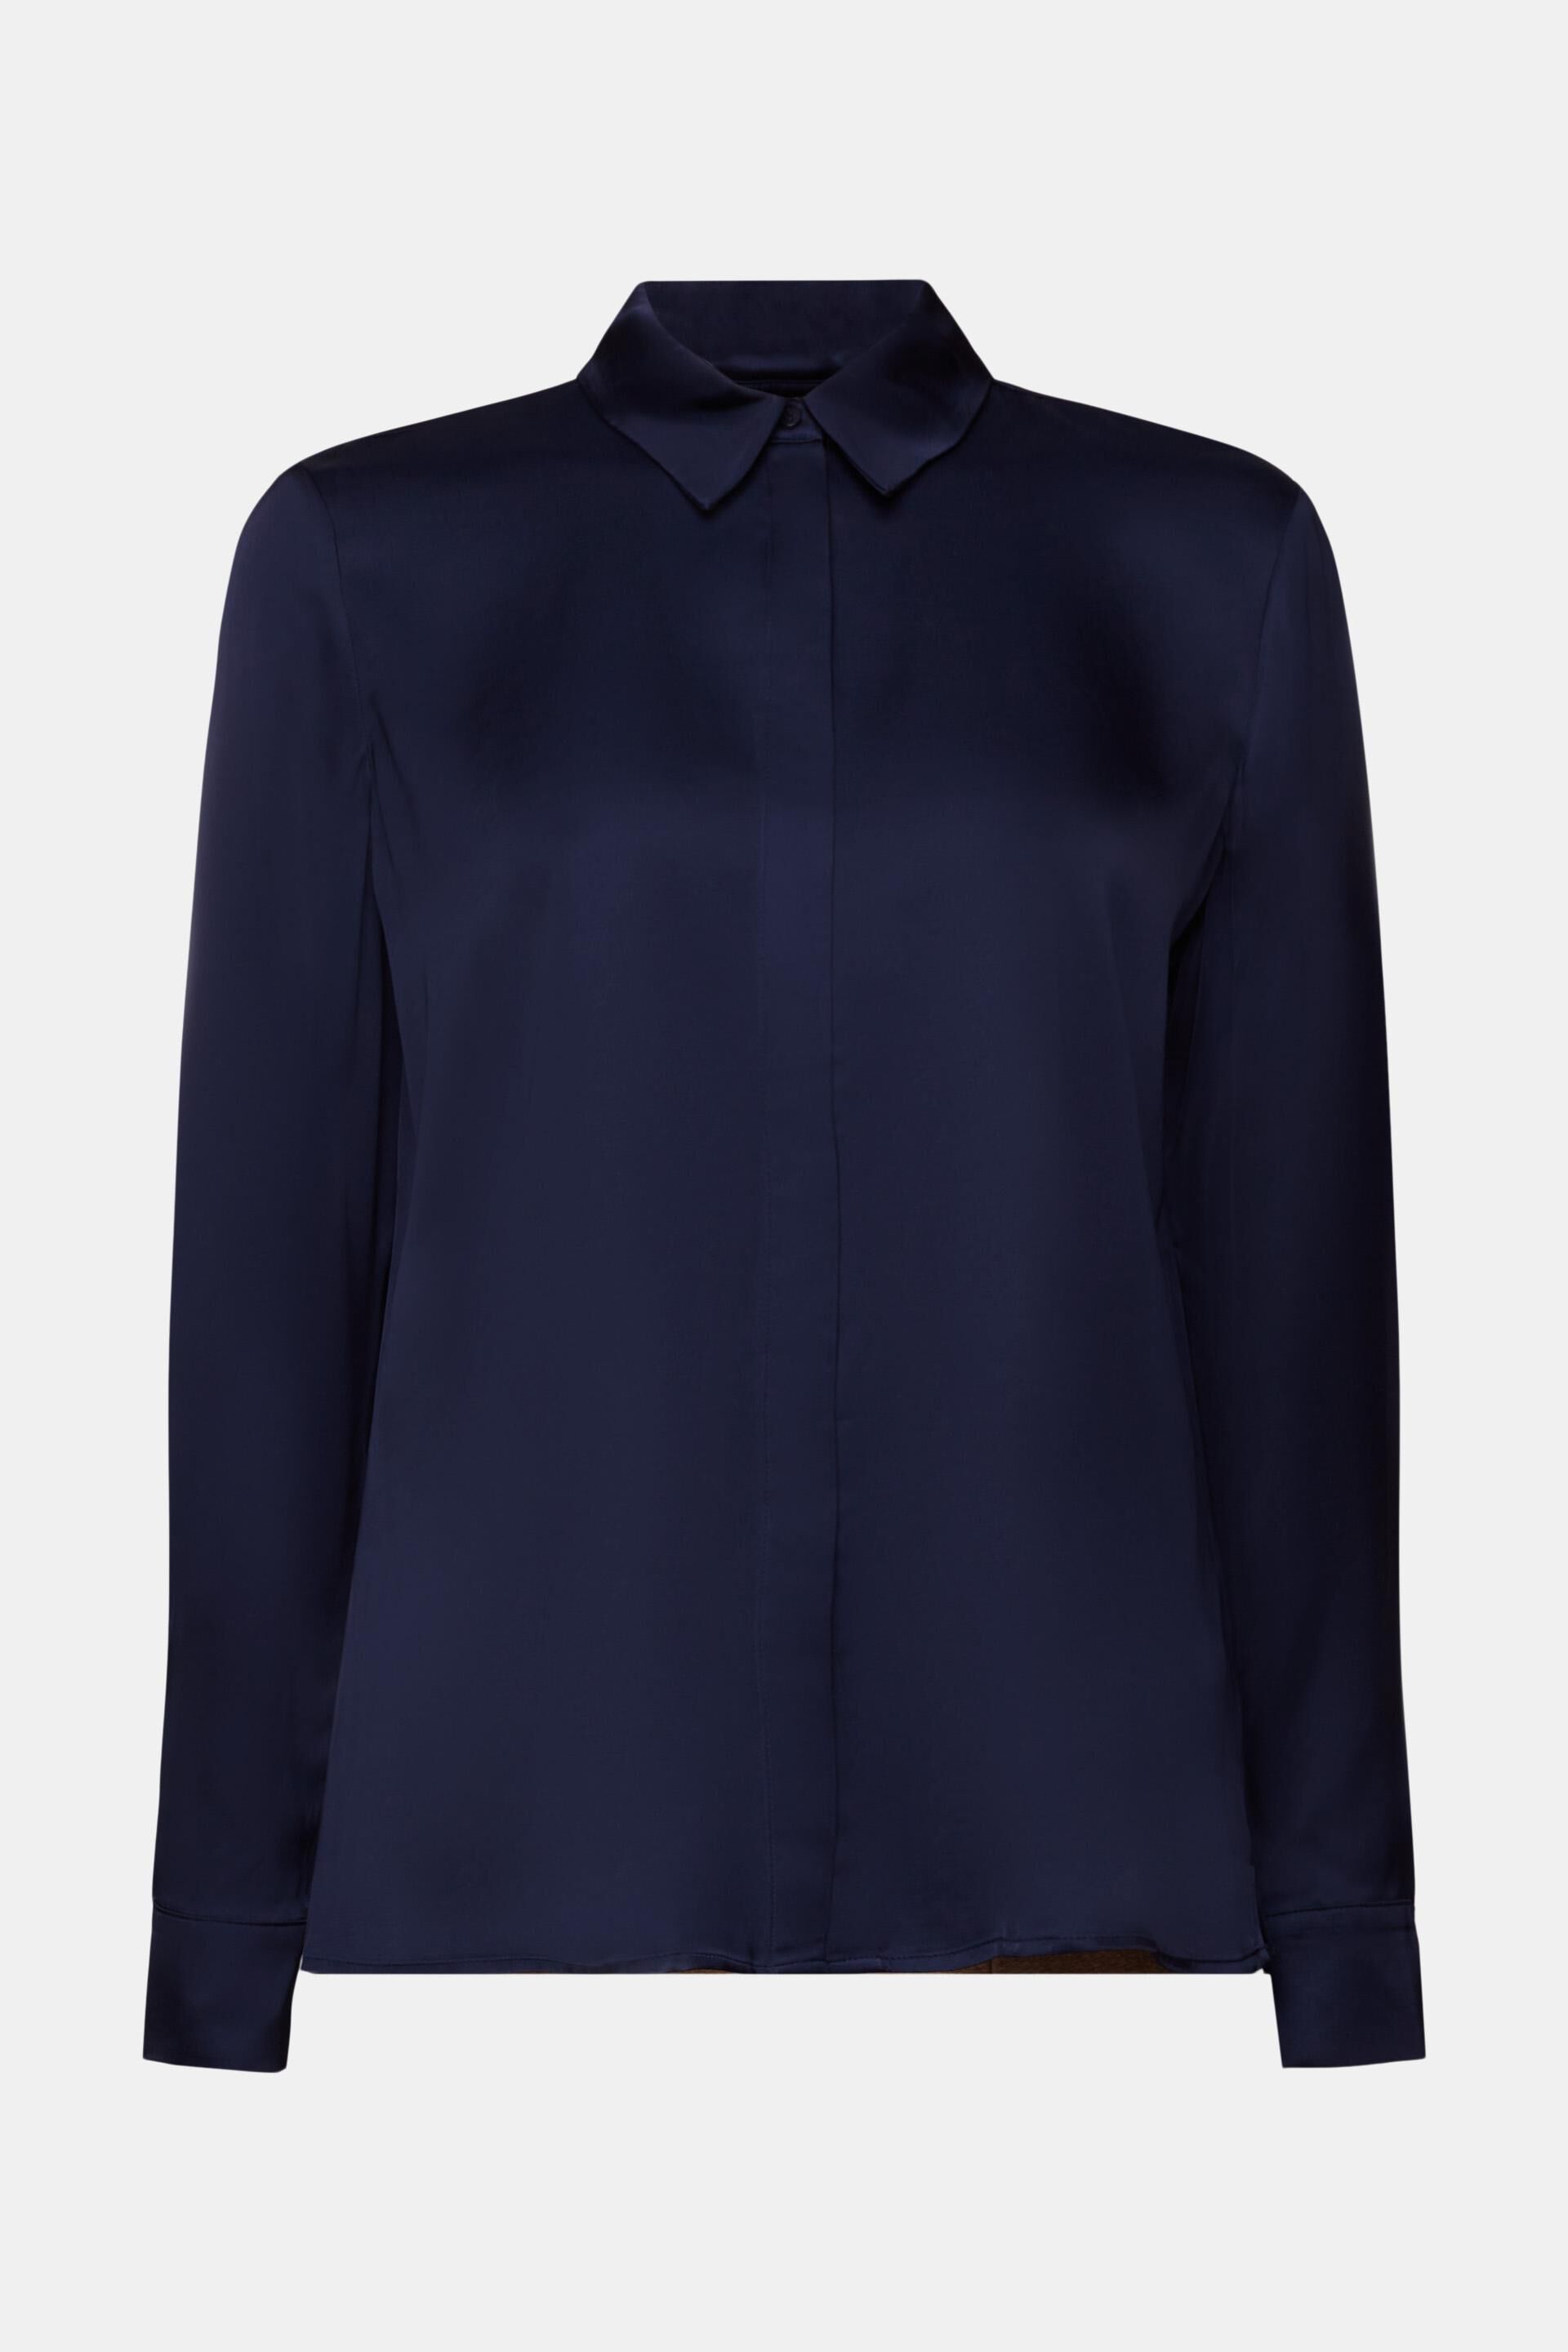 Esprit Collection エスプリ LONGSLEEVE MIT KNOPFLEISTE - Button-down blouse -  navy レディース